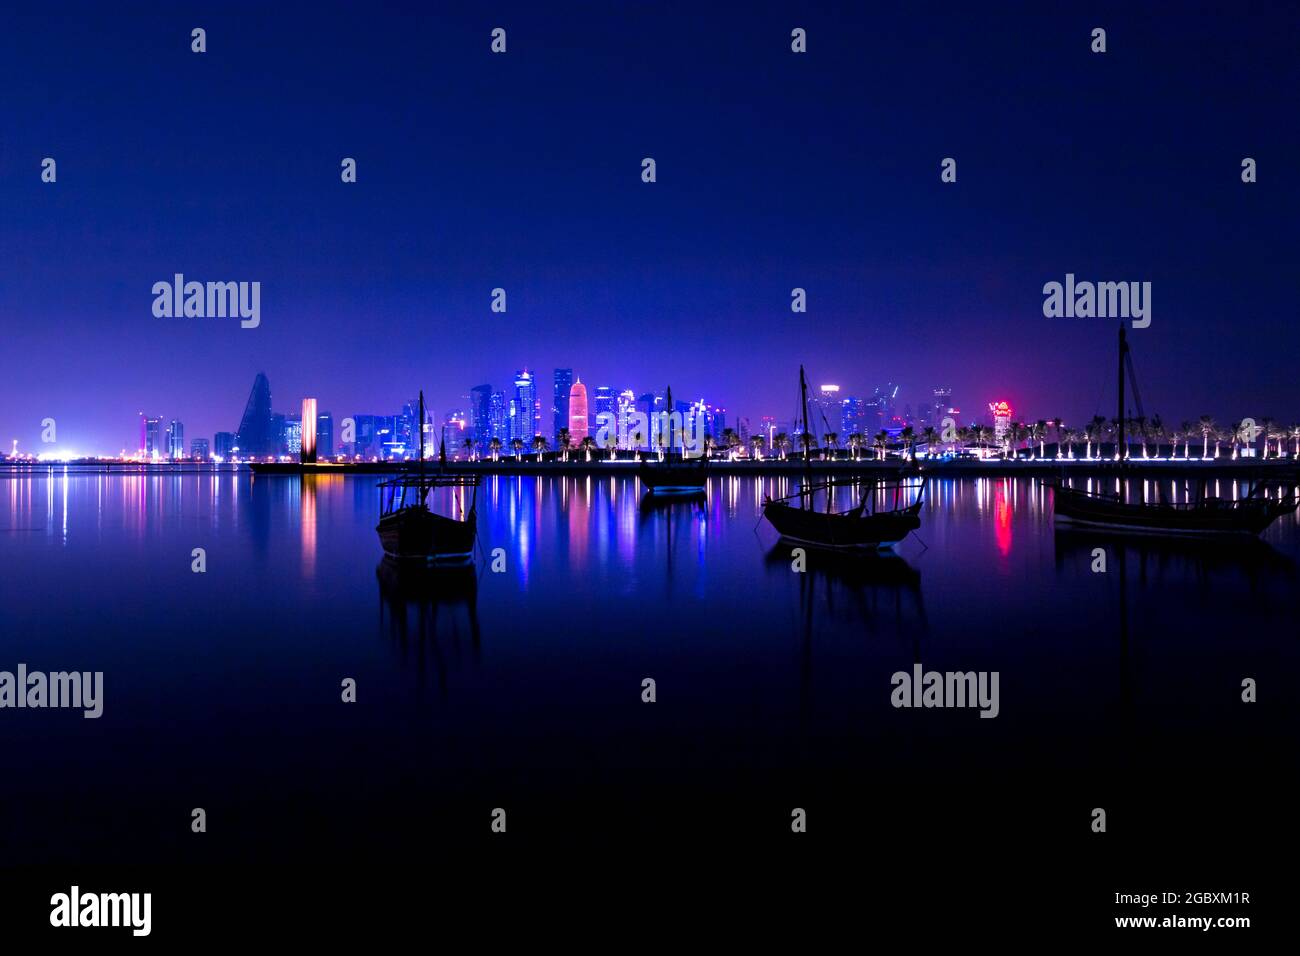 Coloful illuminated skyline of Doha at night with traditional wooden boats called Dhows in the foreground, Qatar, Middle East against dark sky Stock Photo